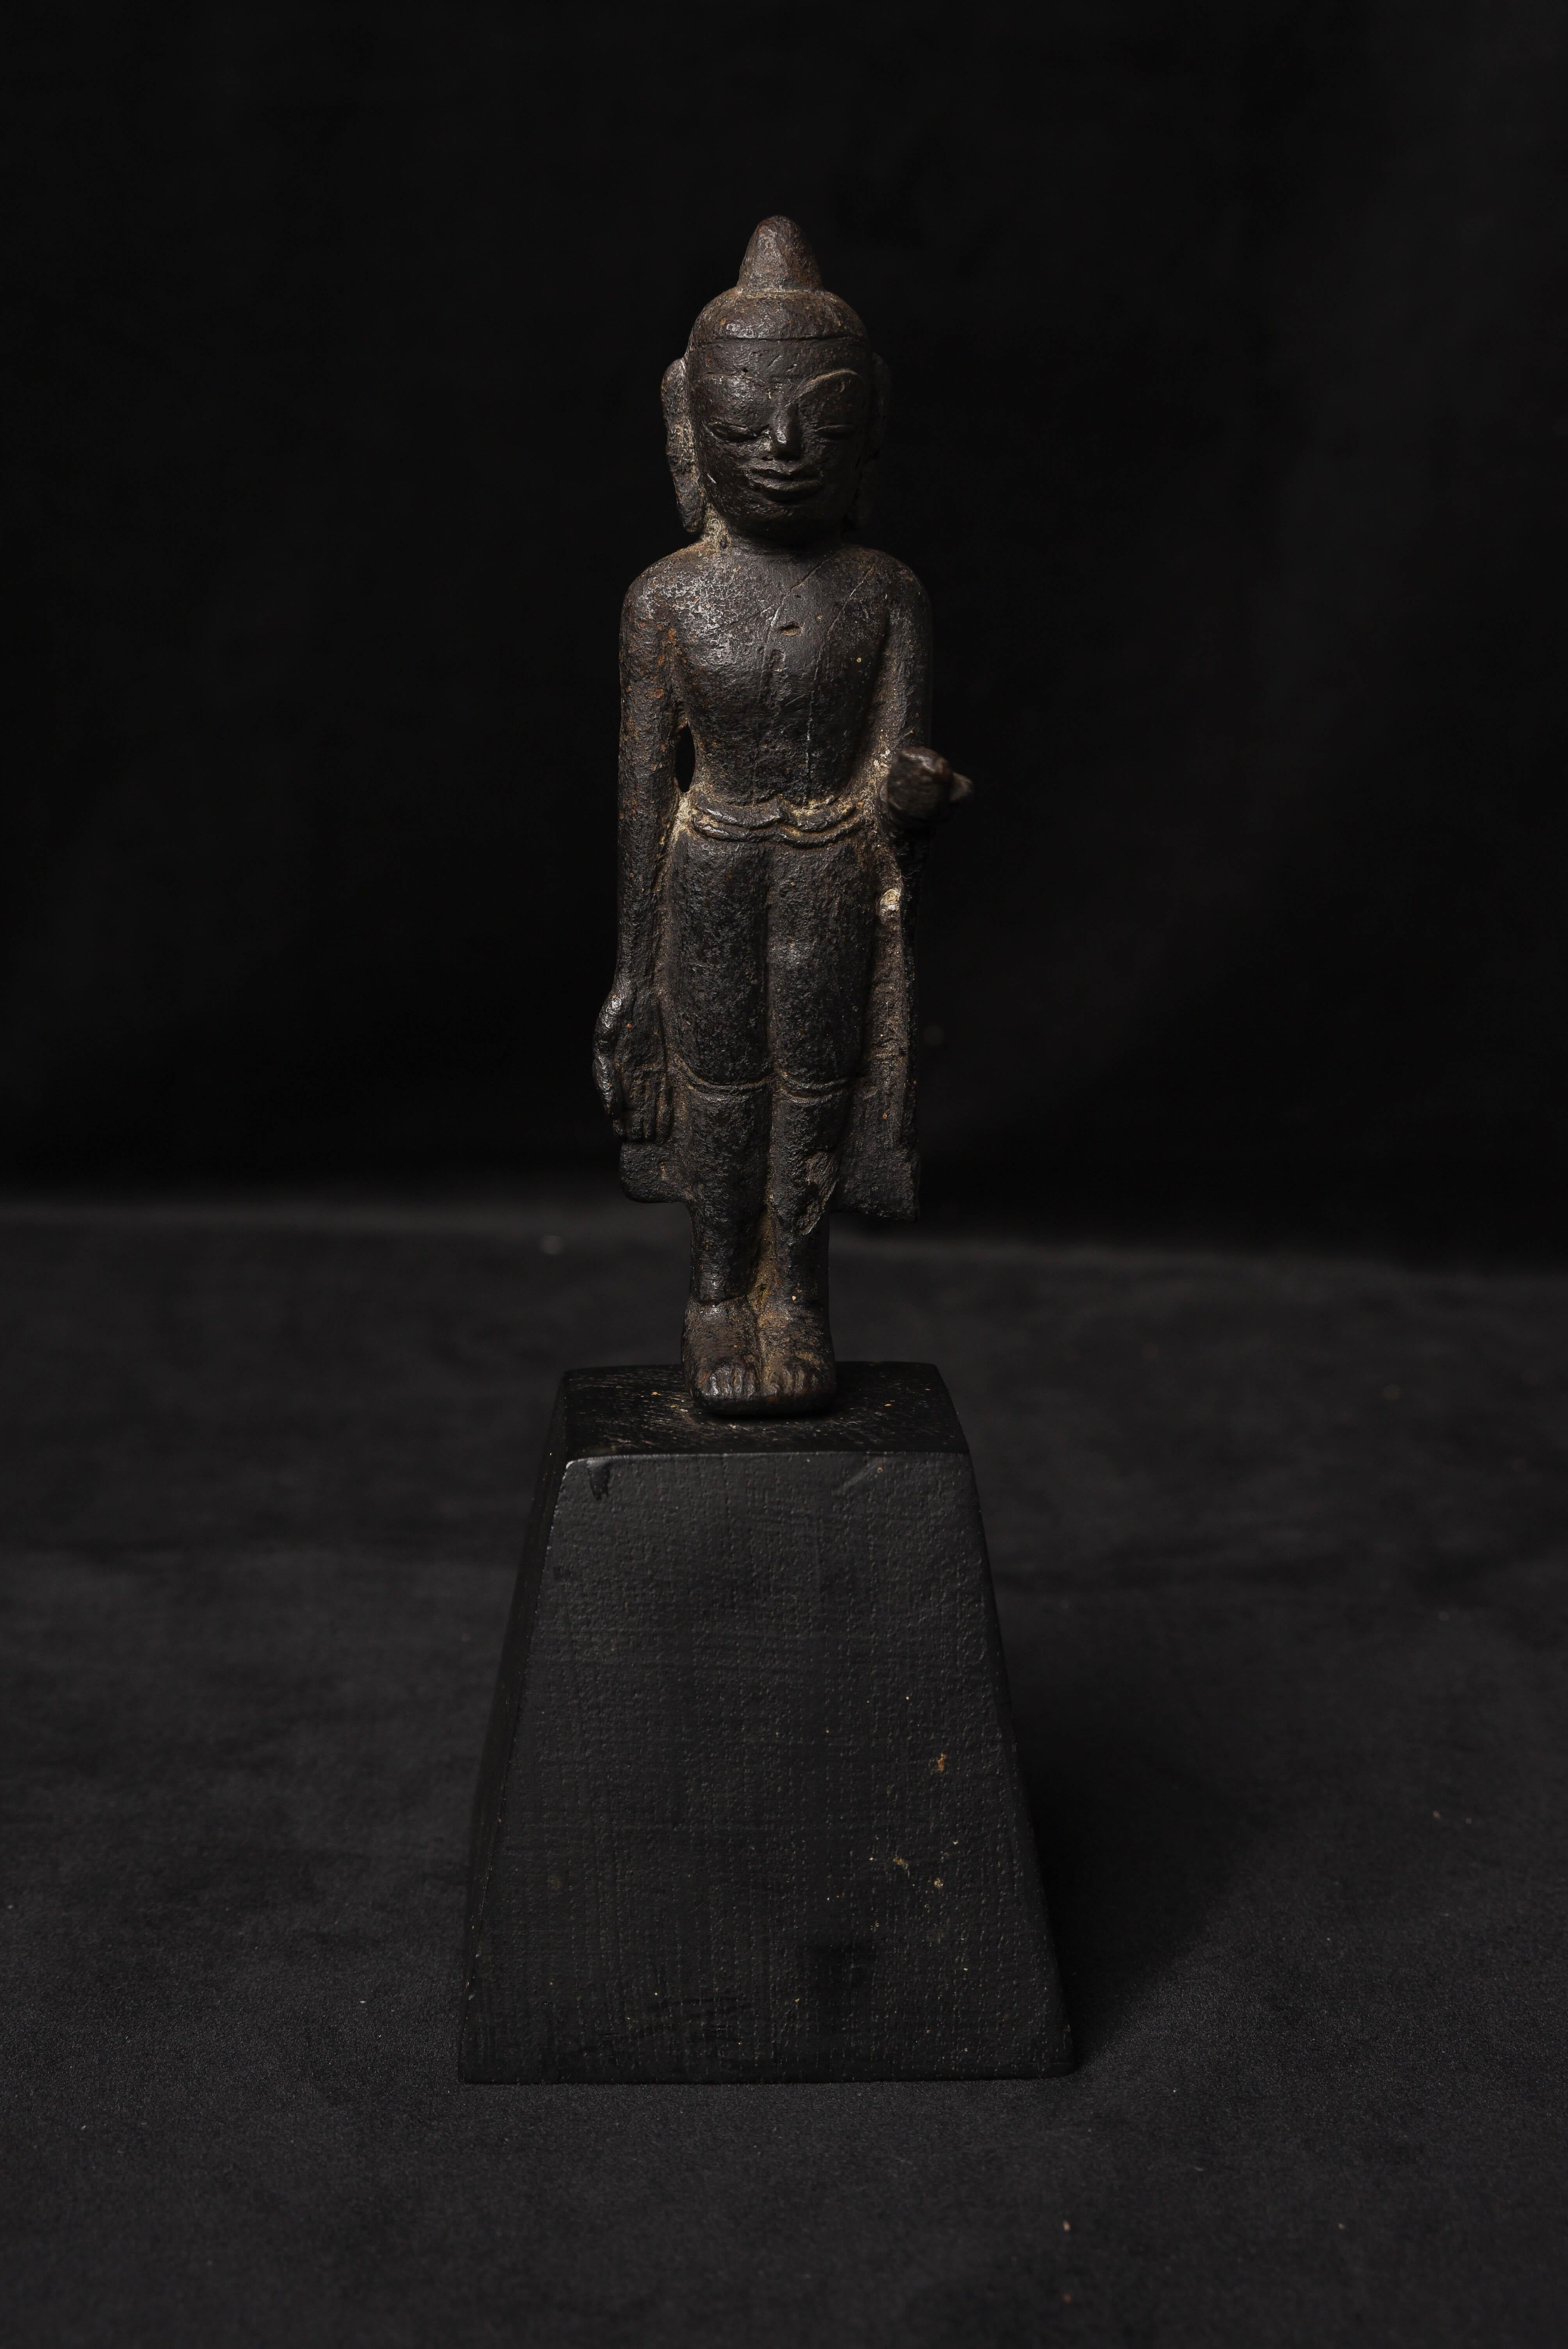 This is a very rare early Mon style solid cast iron standing Buddha from Burma, probably the 10th century. He is one of a kind- I’ve seen related pieces, but never another quite like this. Stands 6.5